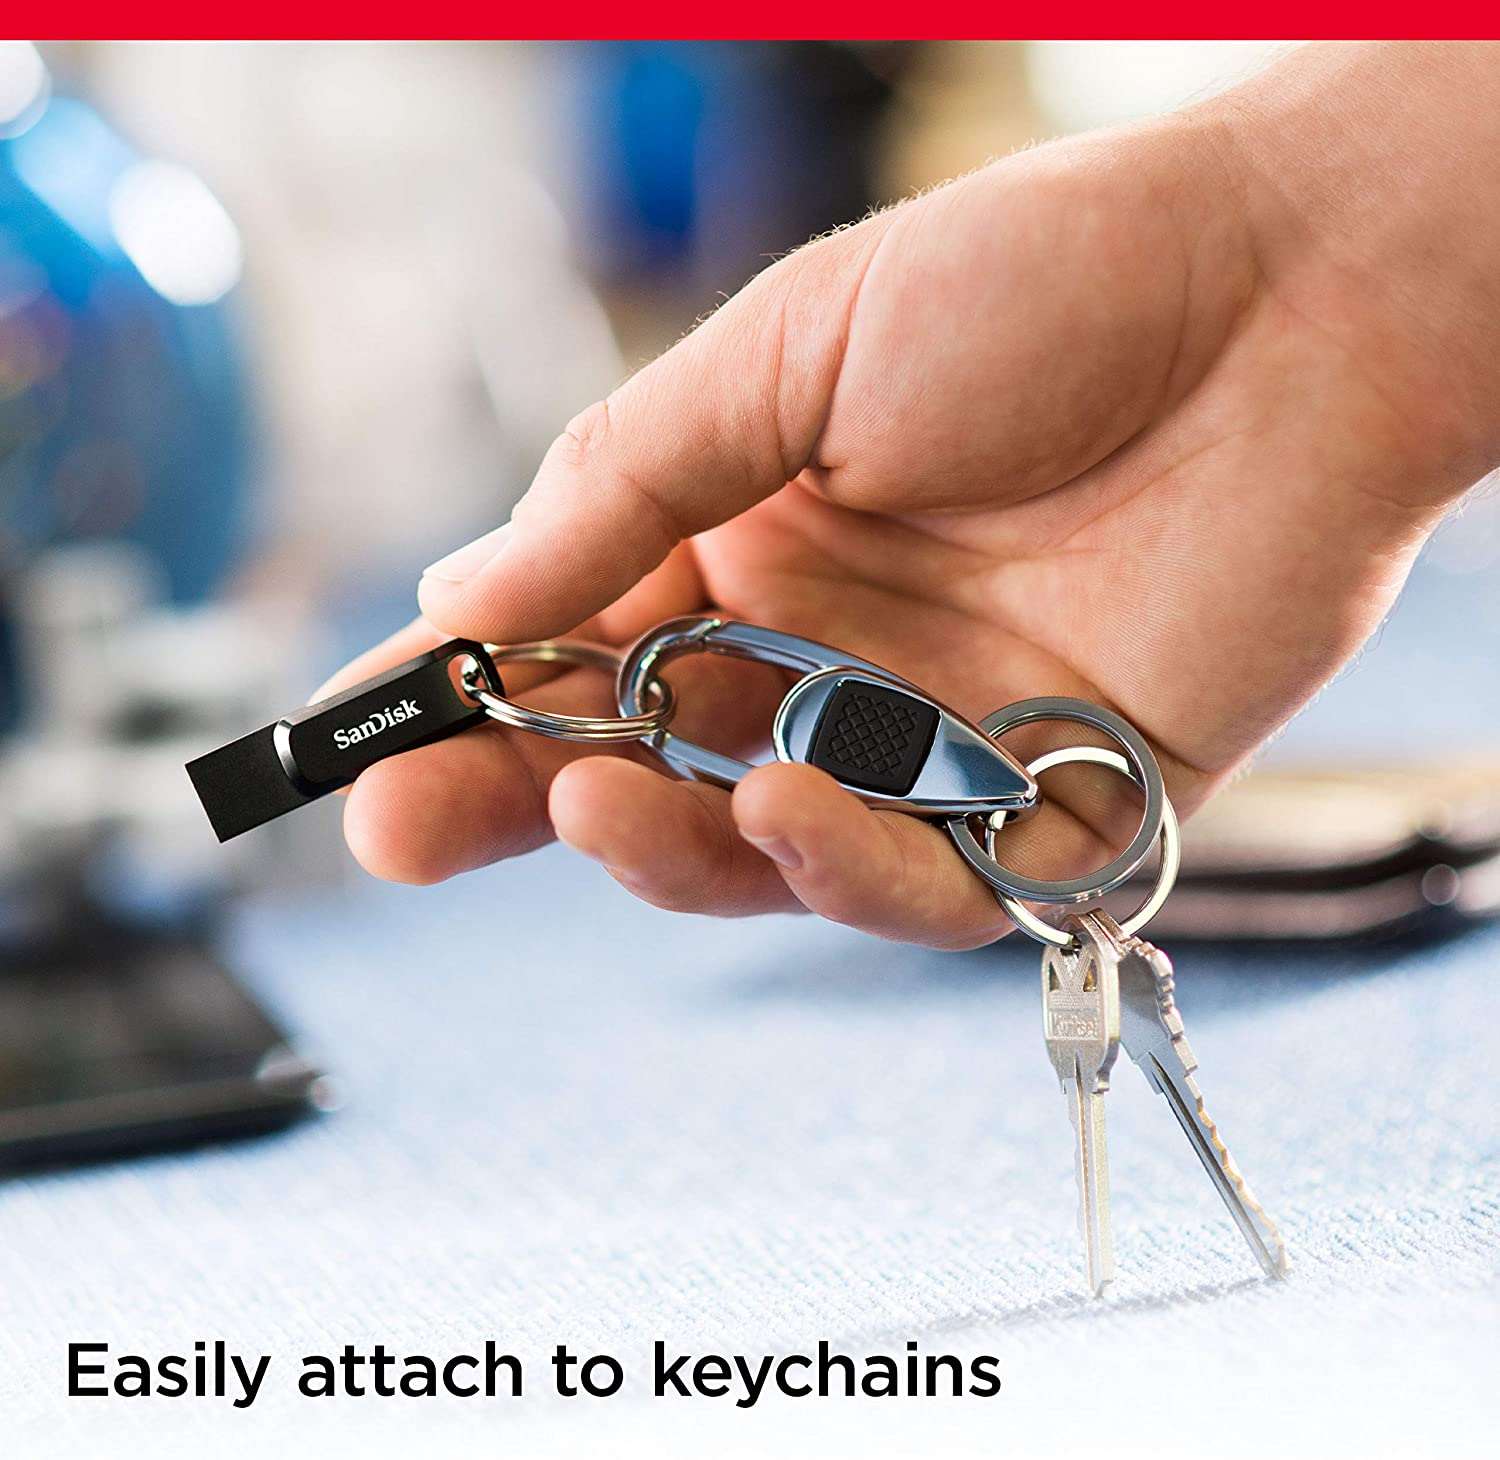  easily attach to keychains 